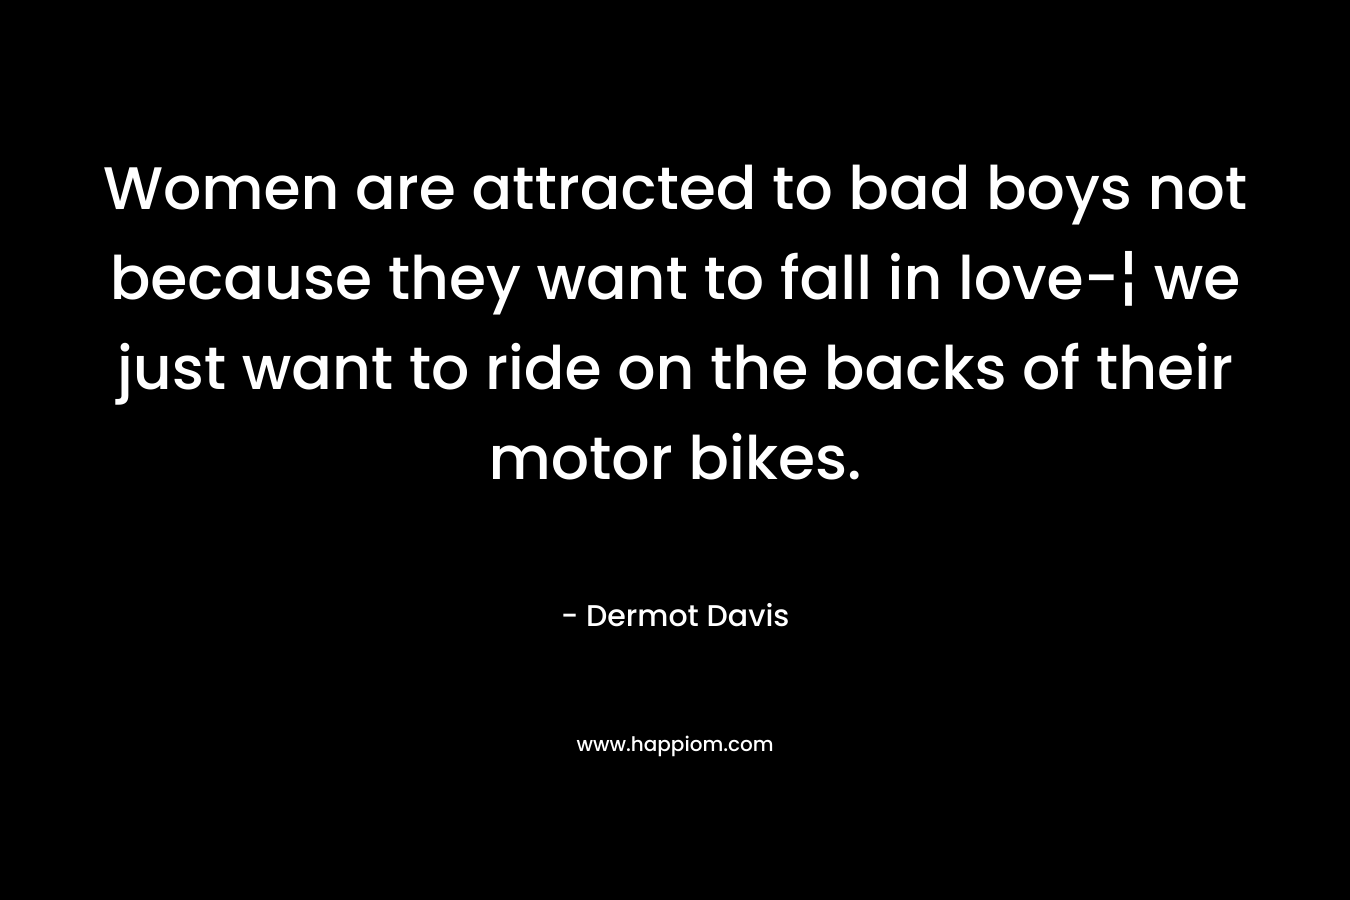 Women are attracted to bad boys not because they want to fall in love-¦ we just want to ride on the backs of their motor bikes. – Dermot Davis